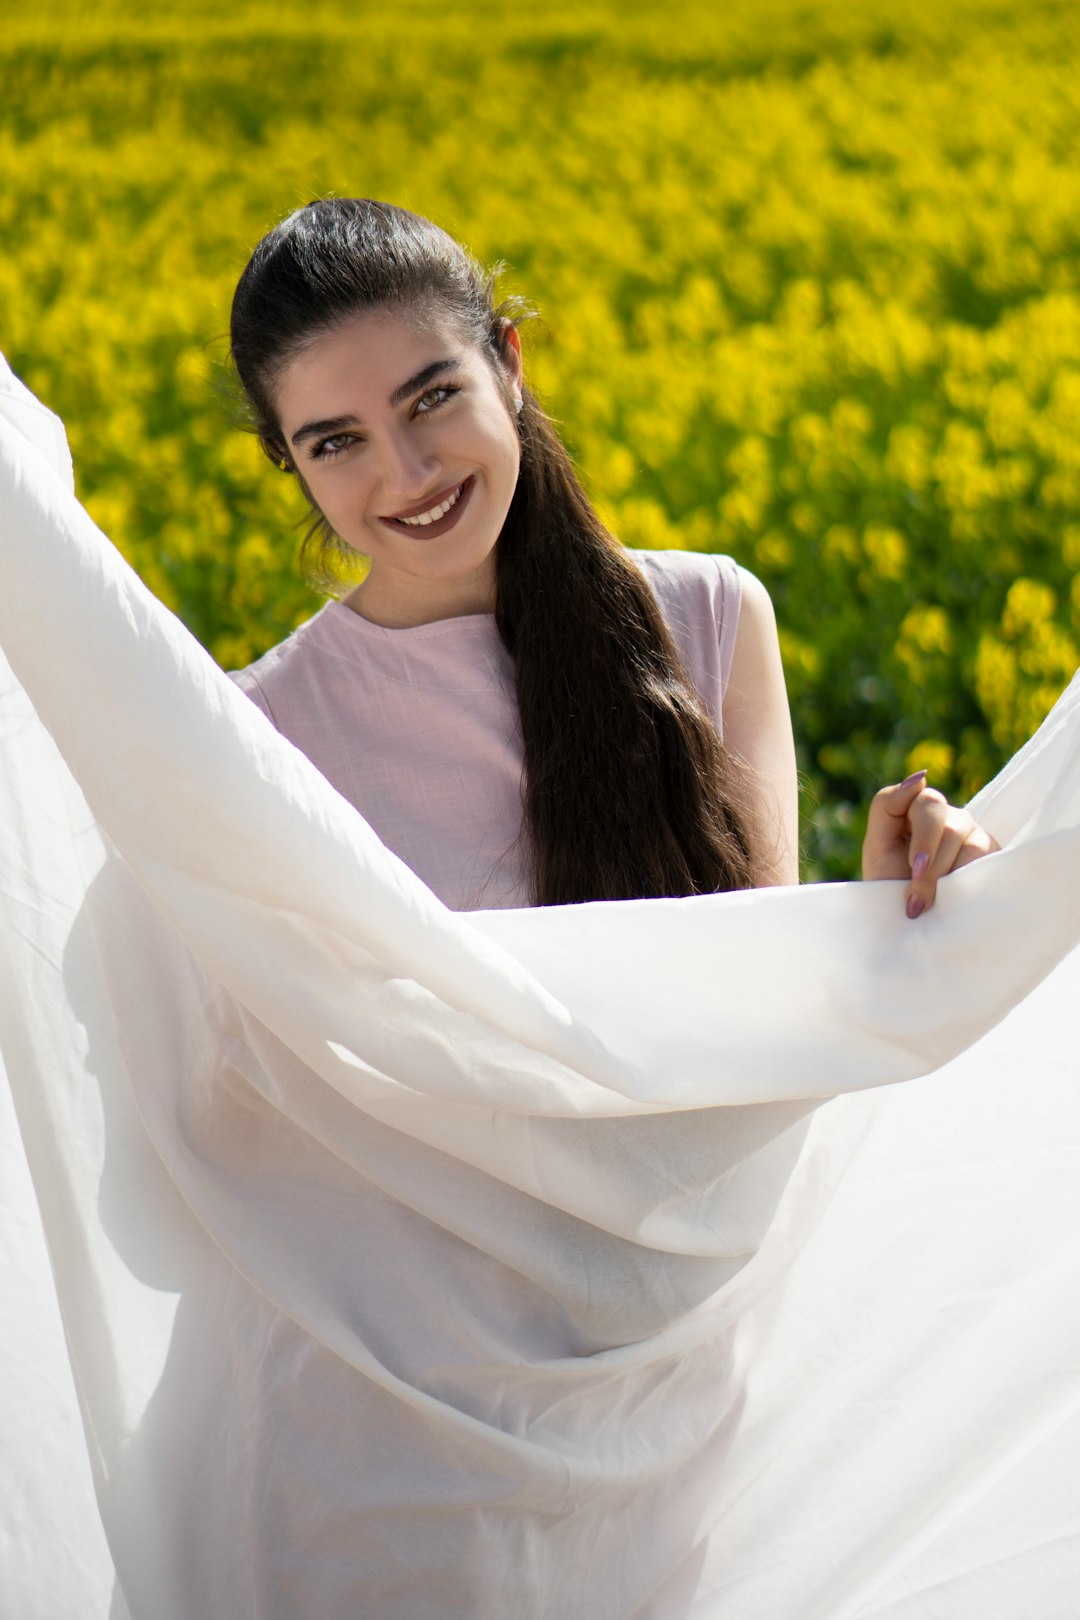 smiling woman in white dress standing on yellow flower field during daytime